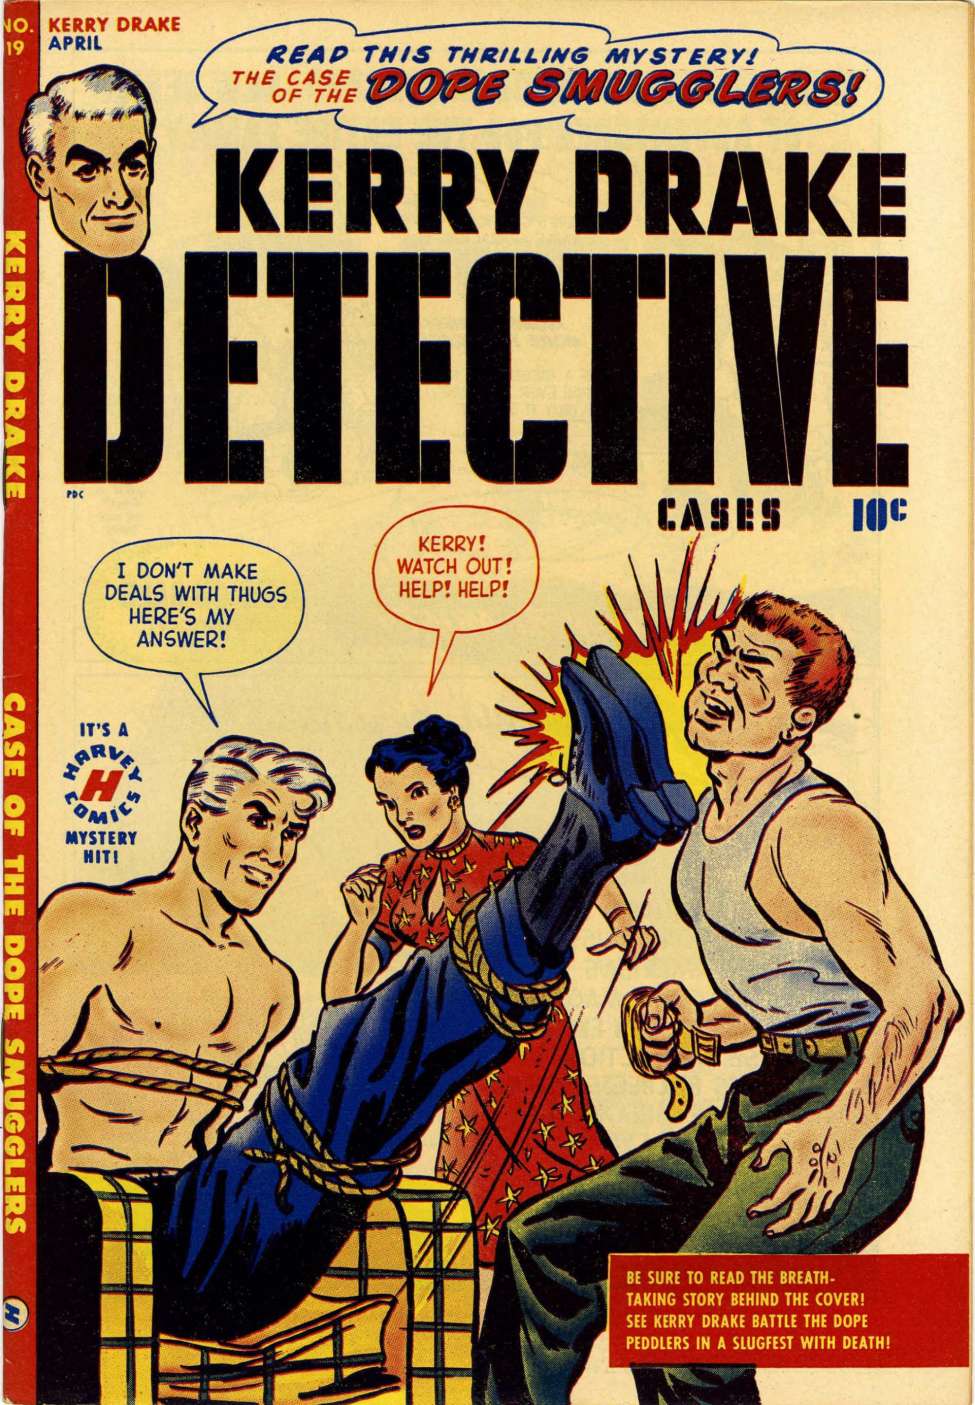 Book Cover For Kerry Drake Detective Cases 19